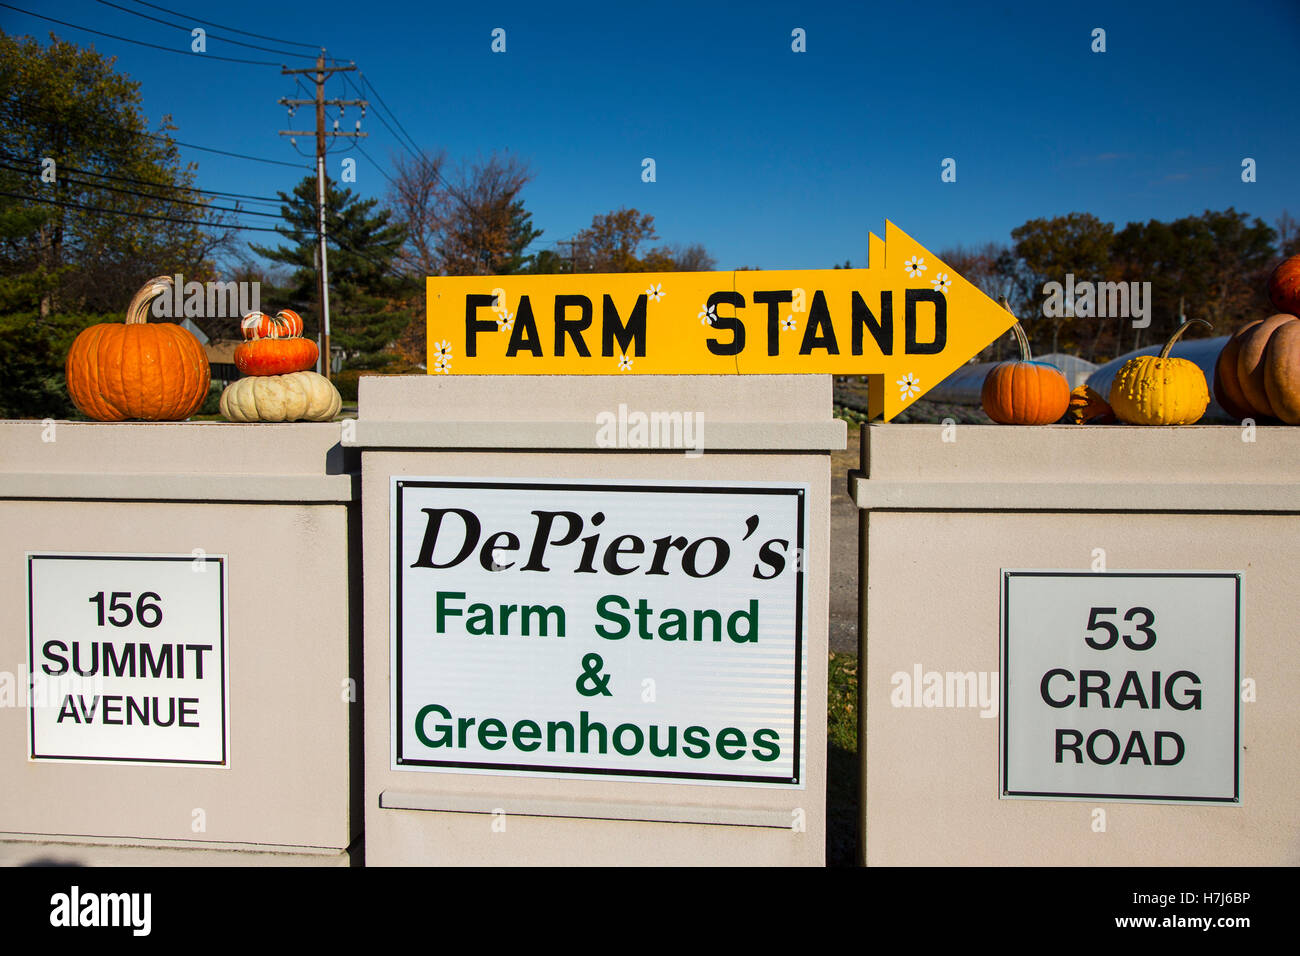 A farm stand sign in Montvale, New Jersey Stock Photo